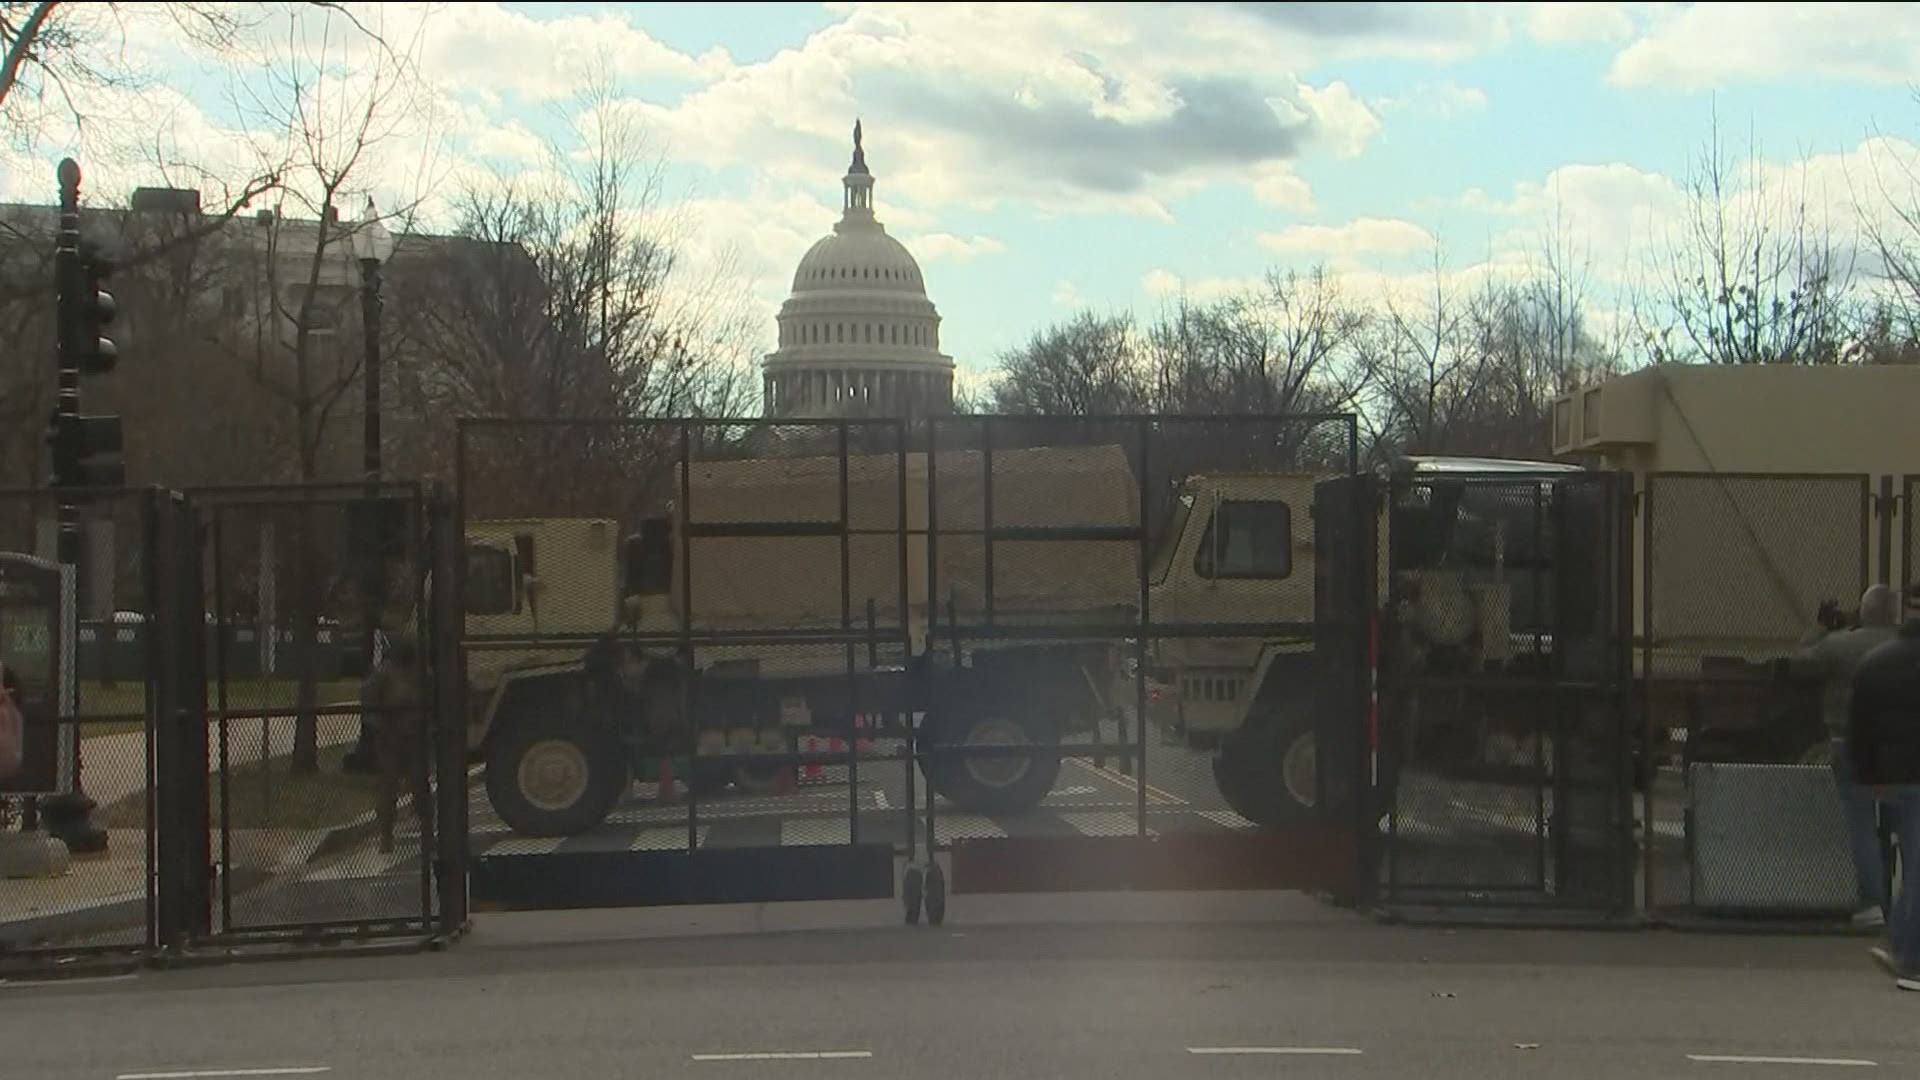 After the Capitol riots on Jan. 6, security in DC is at an all-time high